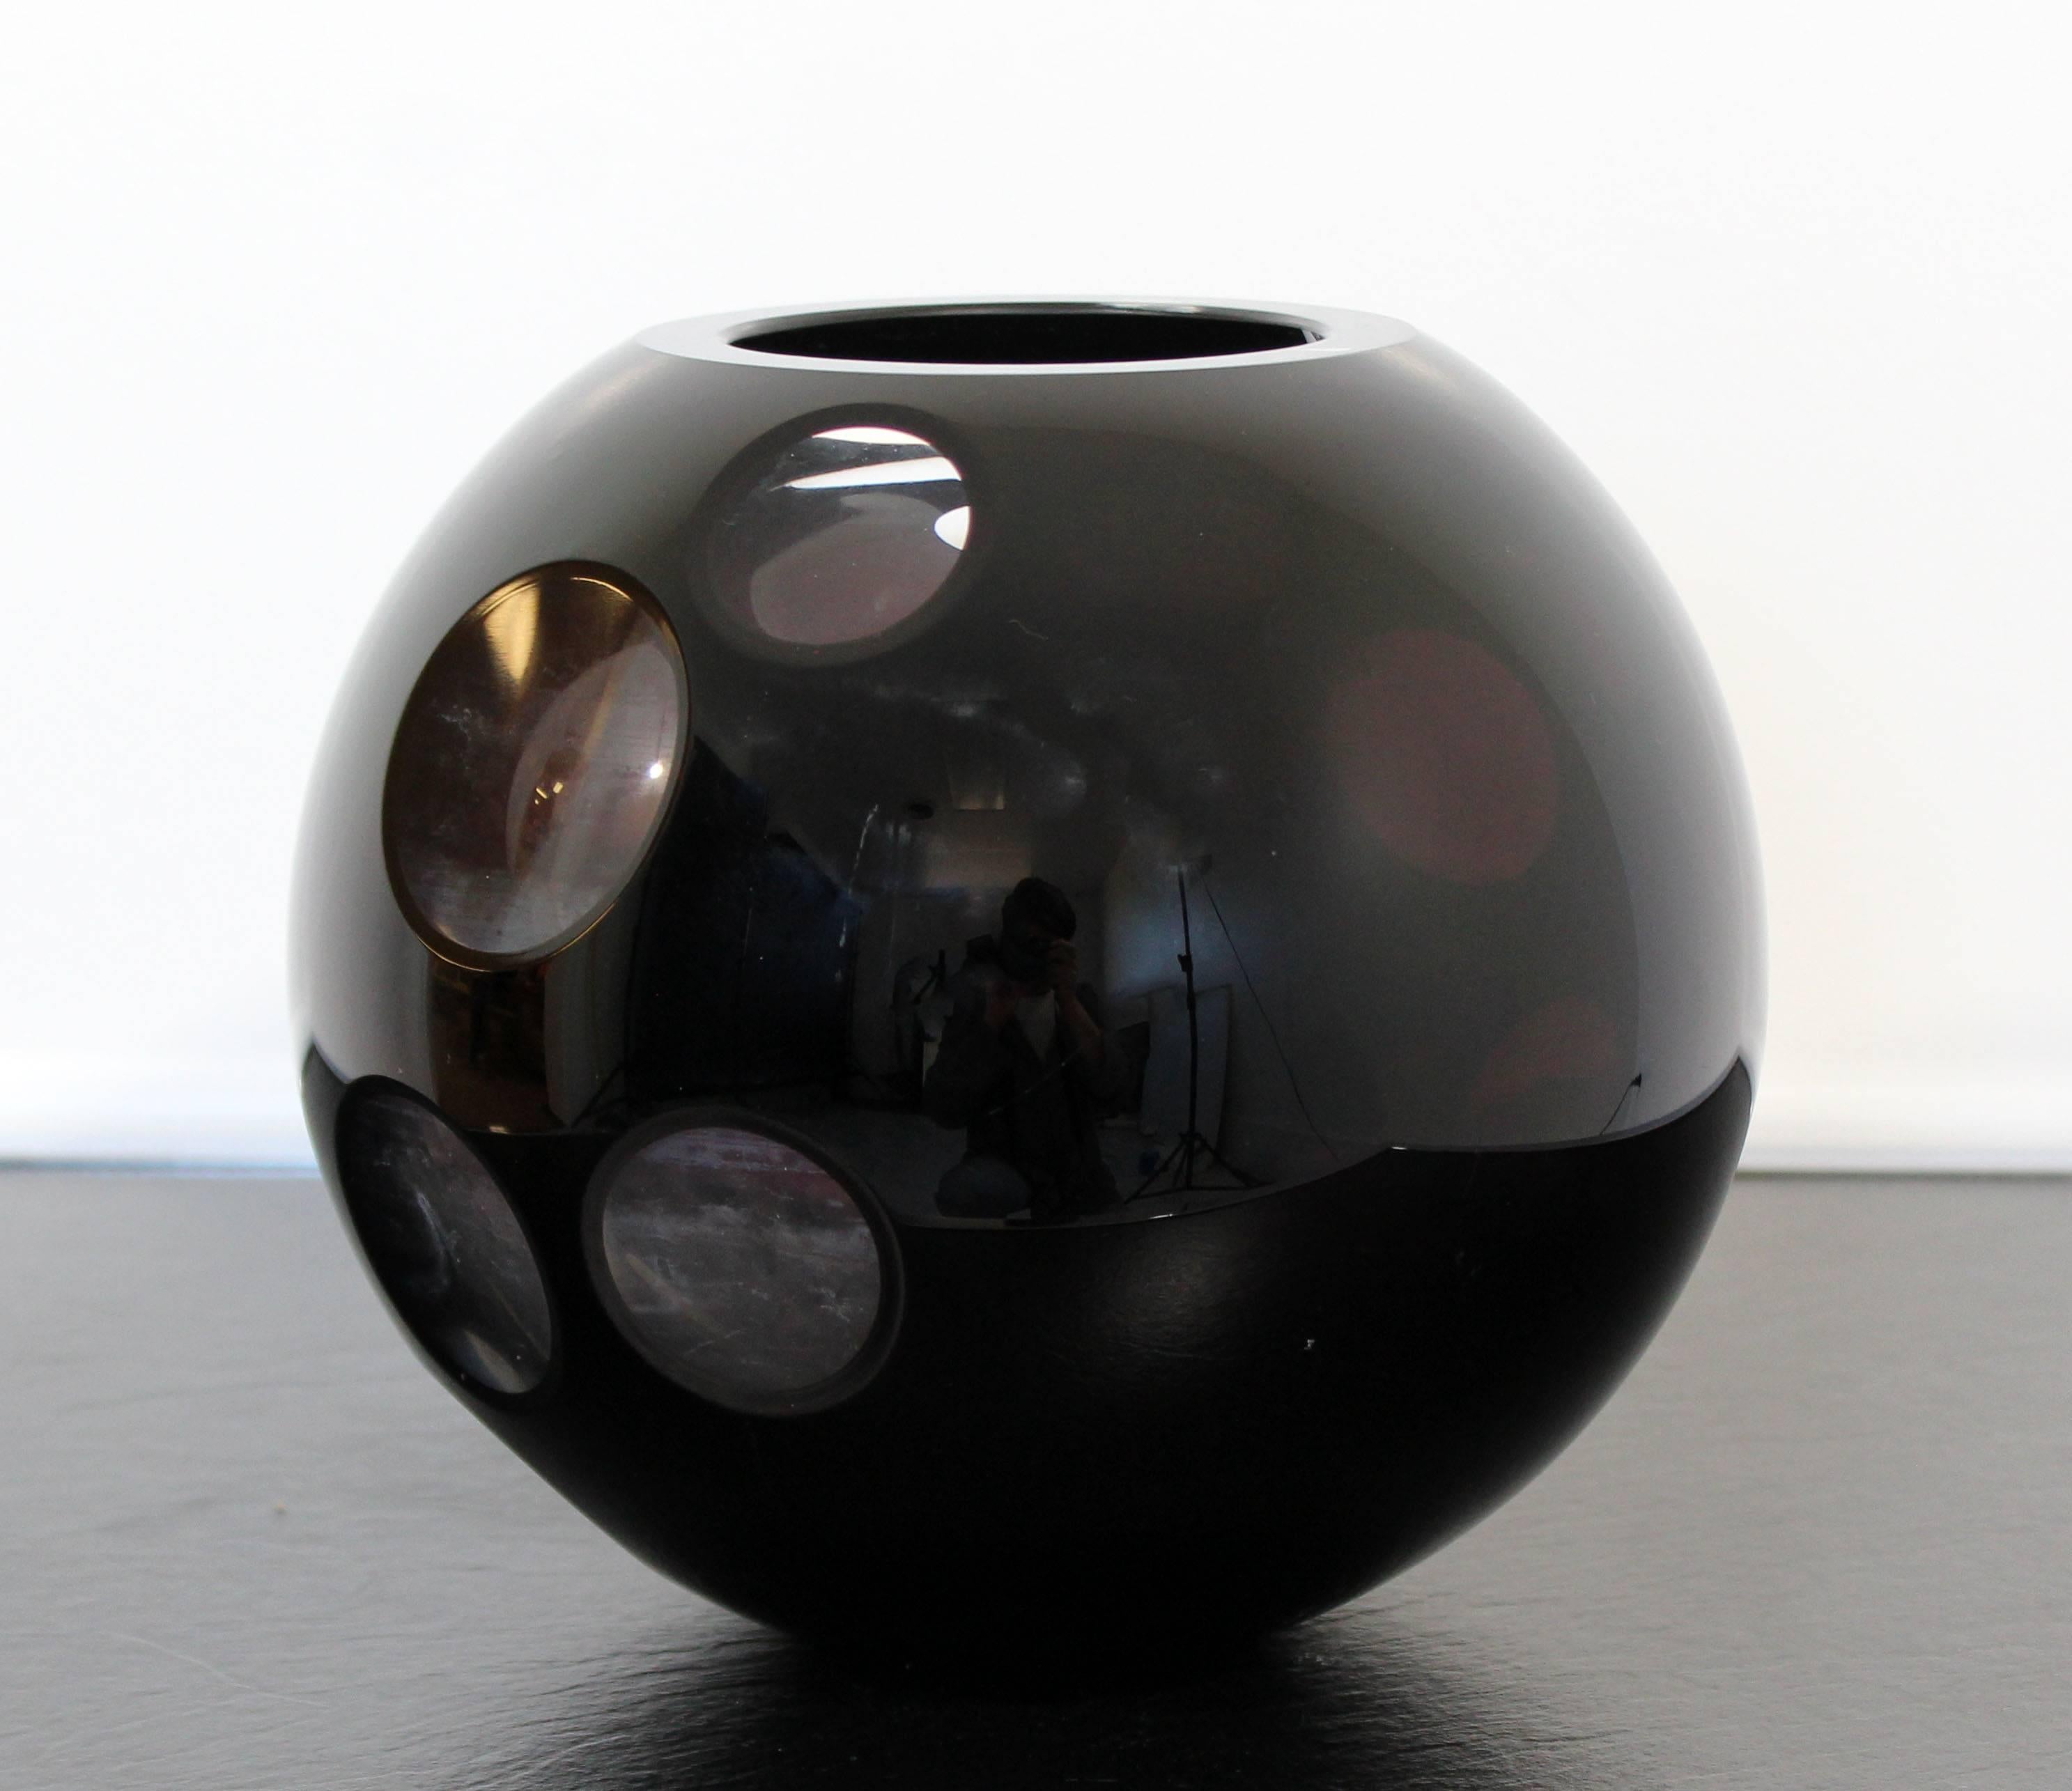 For your consideration is a beautiful, black glass, Mazzega Murano signed art sculpture bowl. In excellent condition. The dimensions are 8